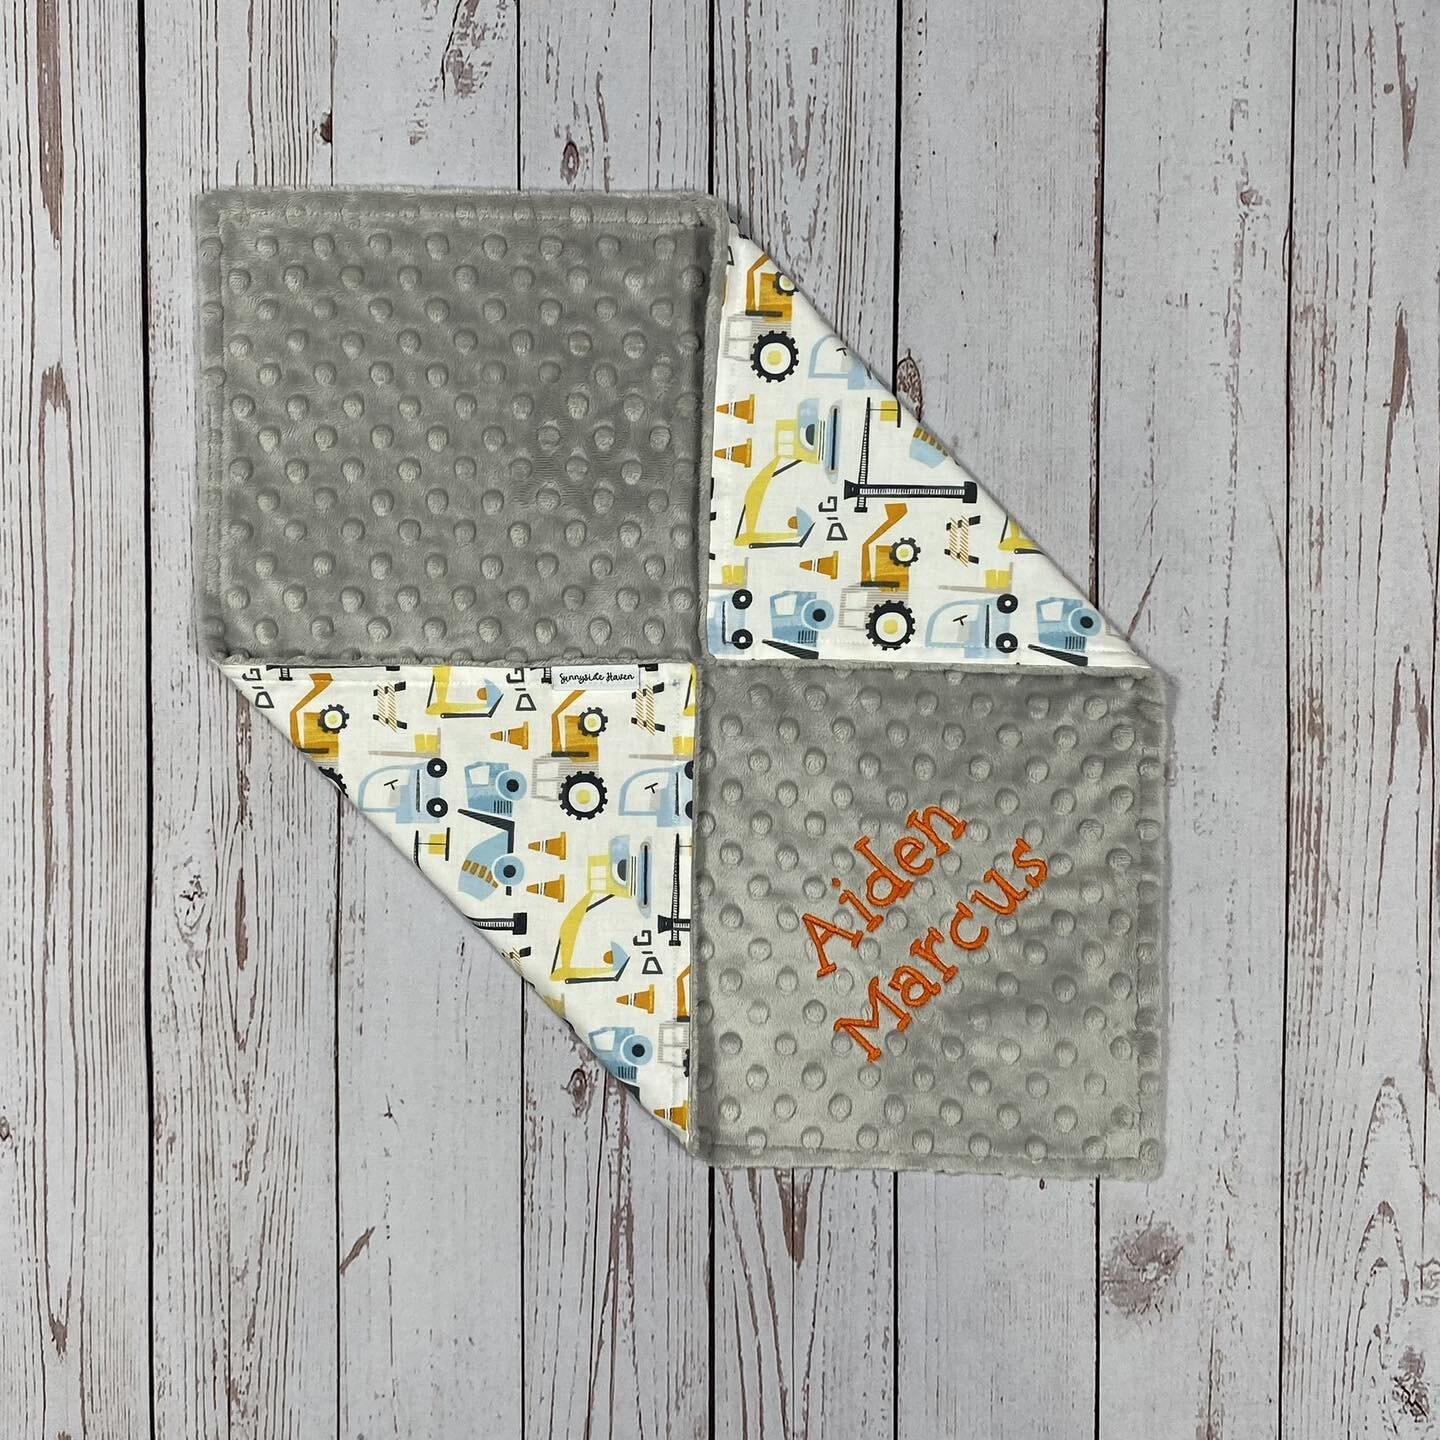 Looking for a baby shower gift? This lovey is the perfect gift for a future little builder 👷&zwj;♂️🛠️ #sunnysidehaven #diggersanddozers #loveyblanket #newbabygift #babyboygiftideas #baby #shower #gift #babyshowergiftideas #babyshowergiftsideas #con